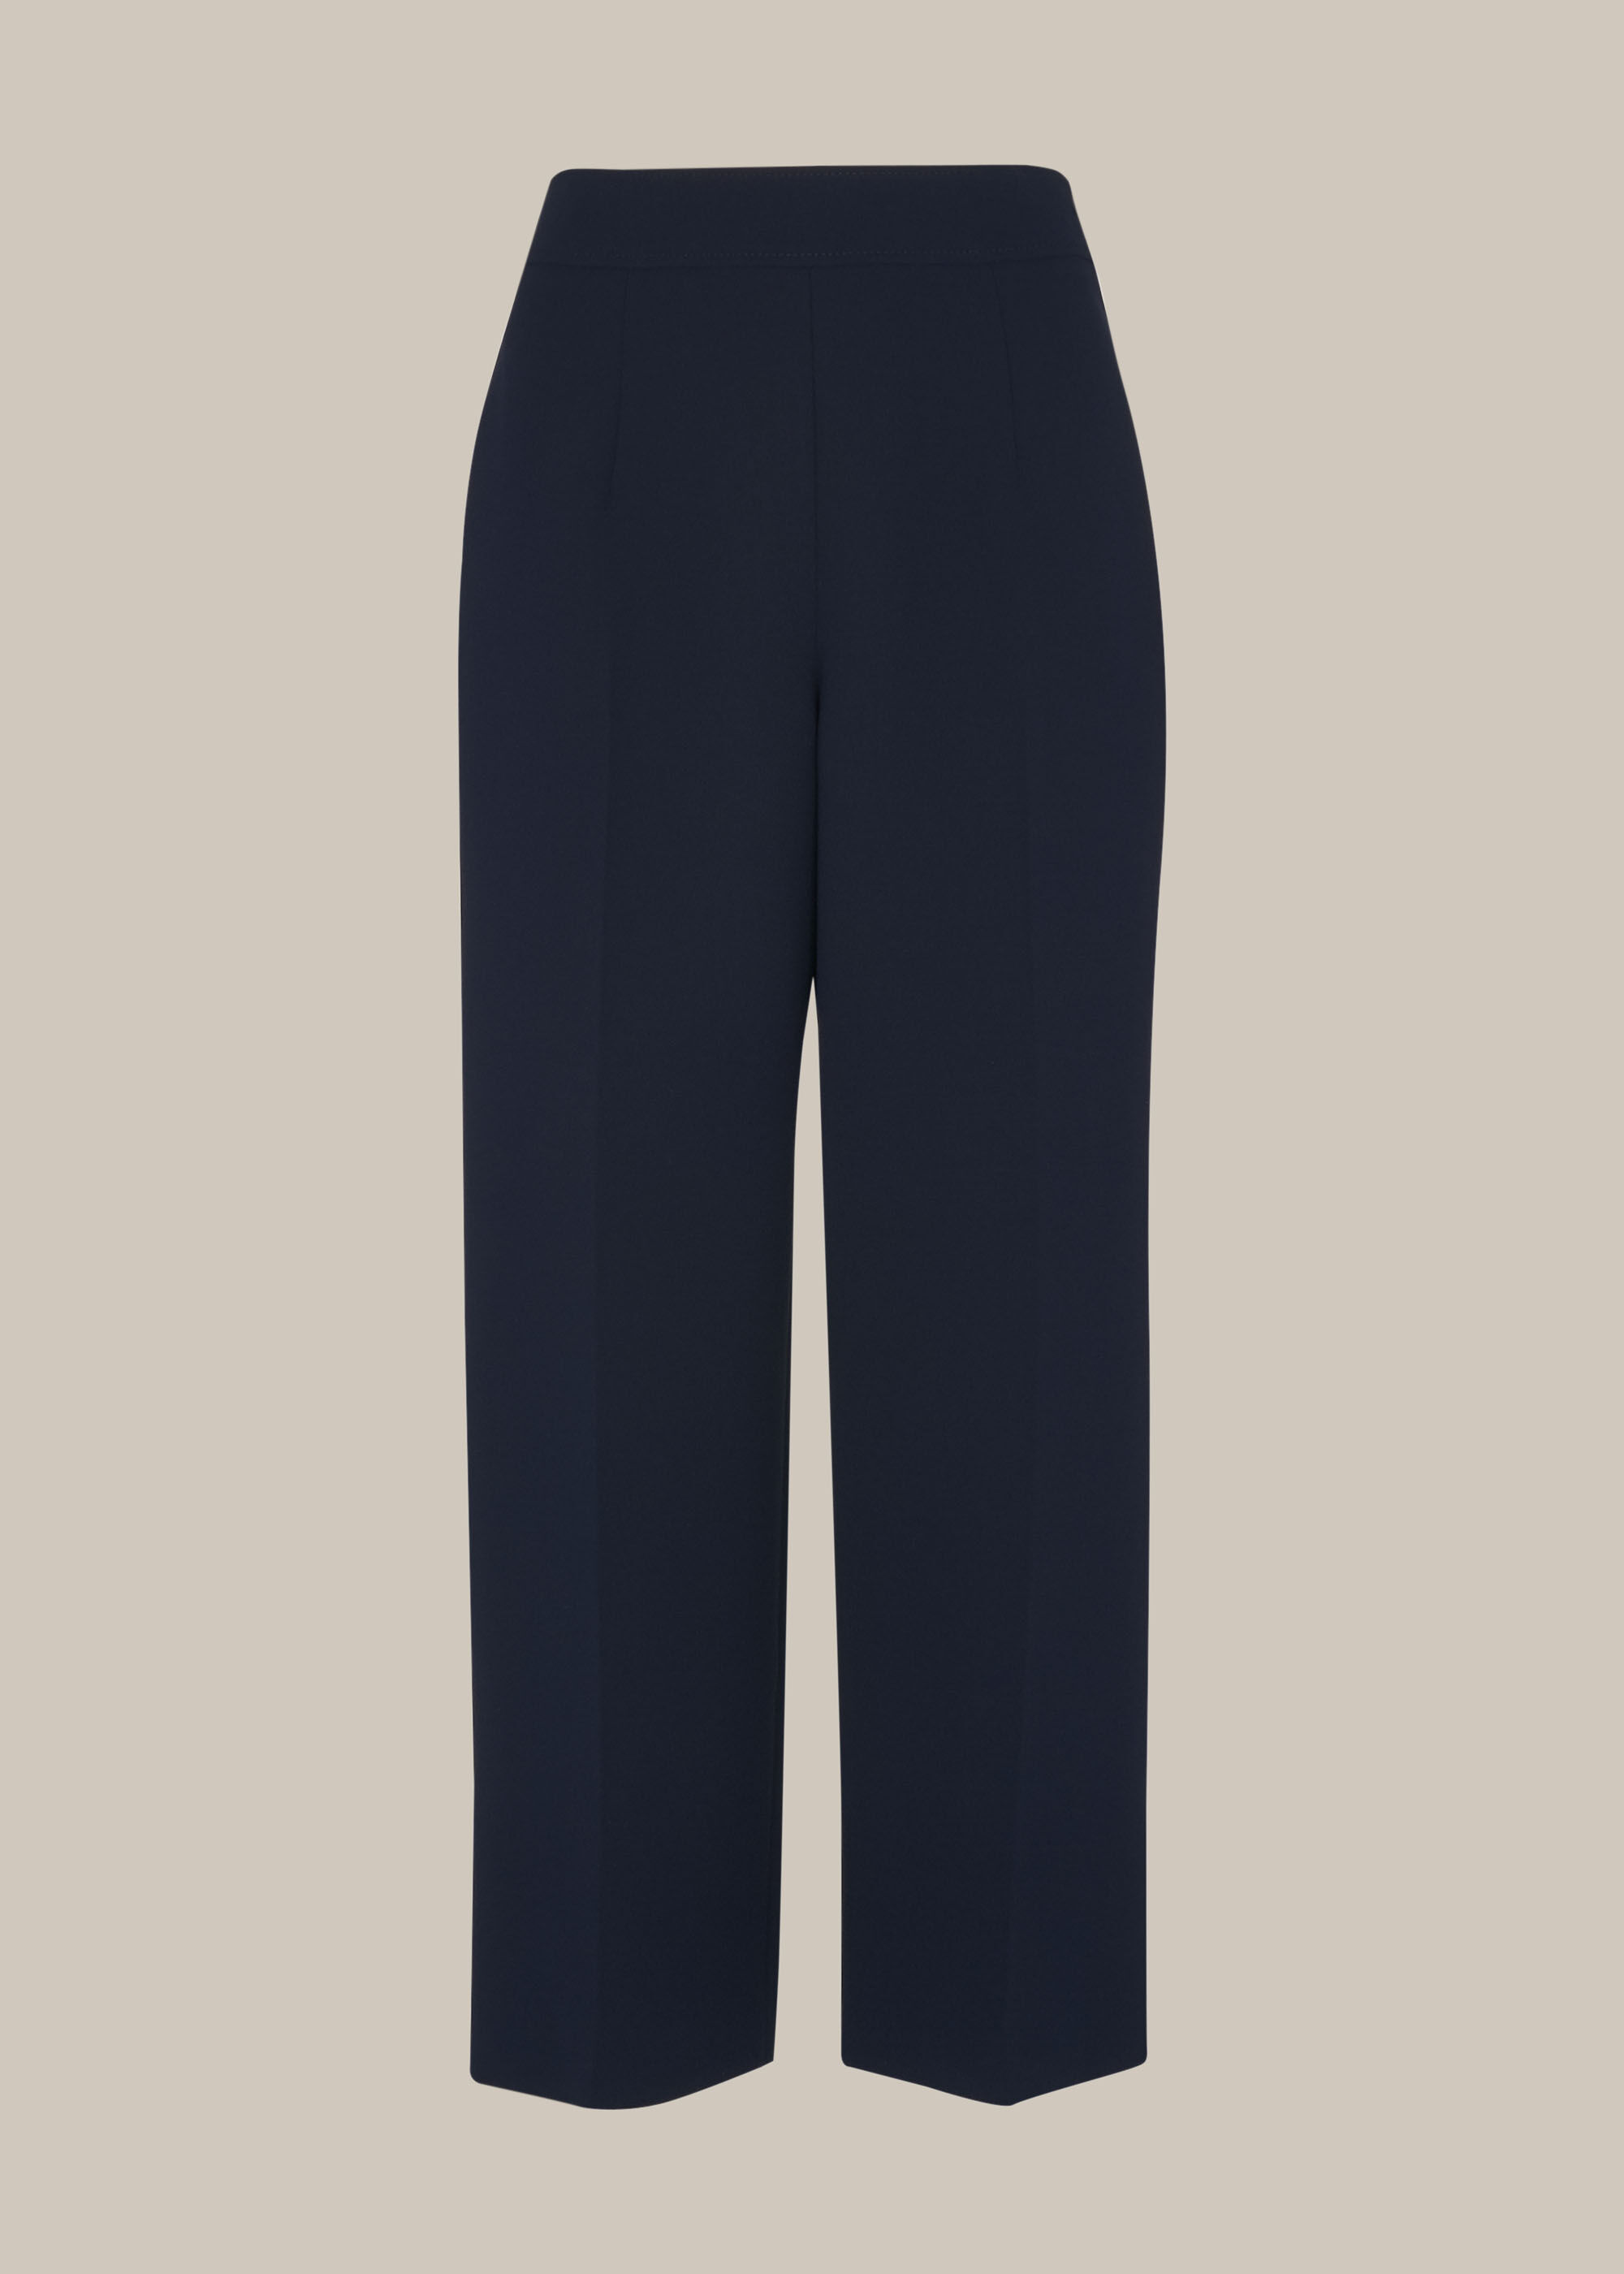 Cilento Woman Cropped Trousers with Tulip Hem Navy  Cilento Designer Wear